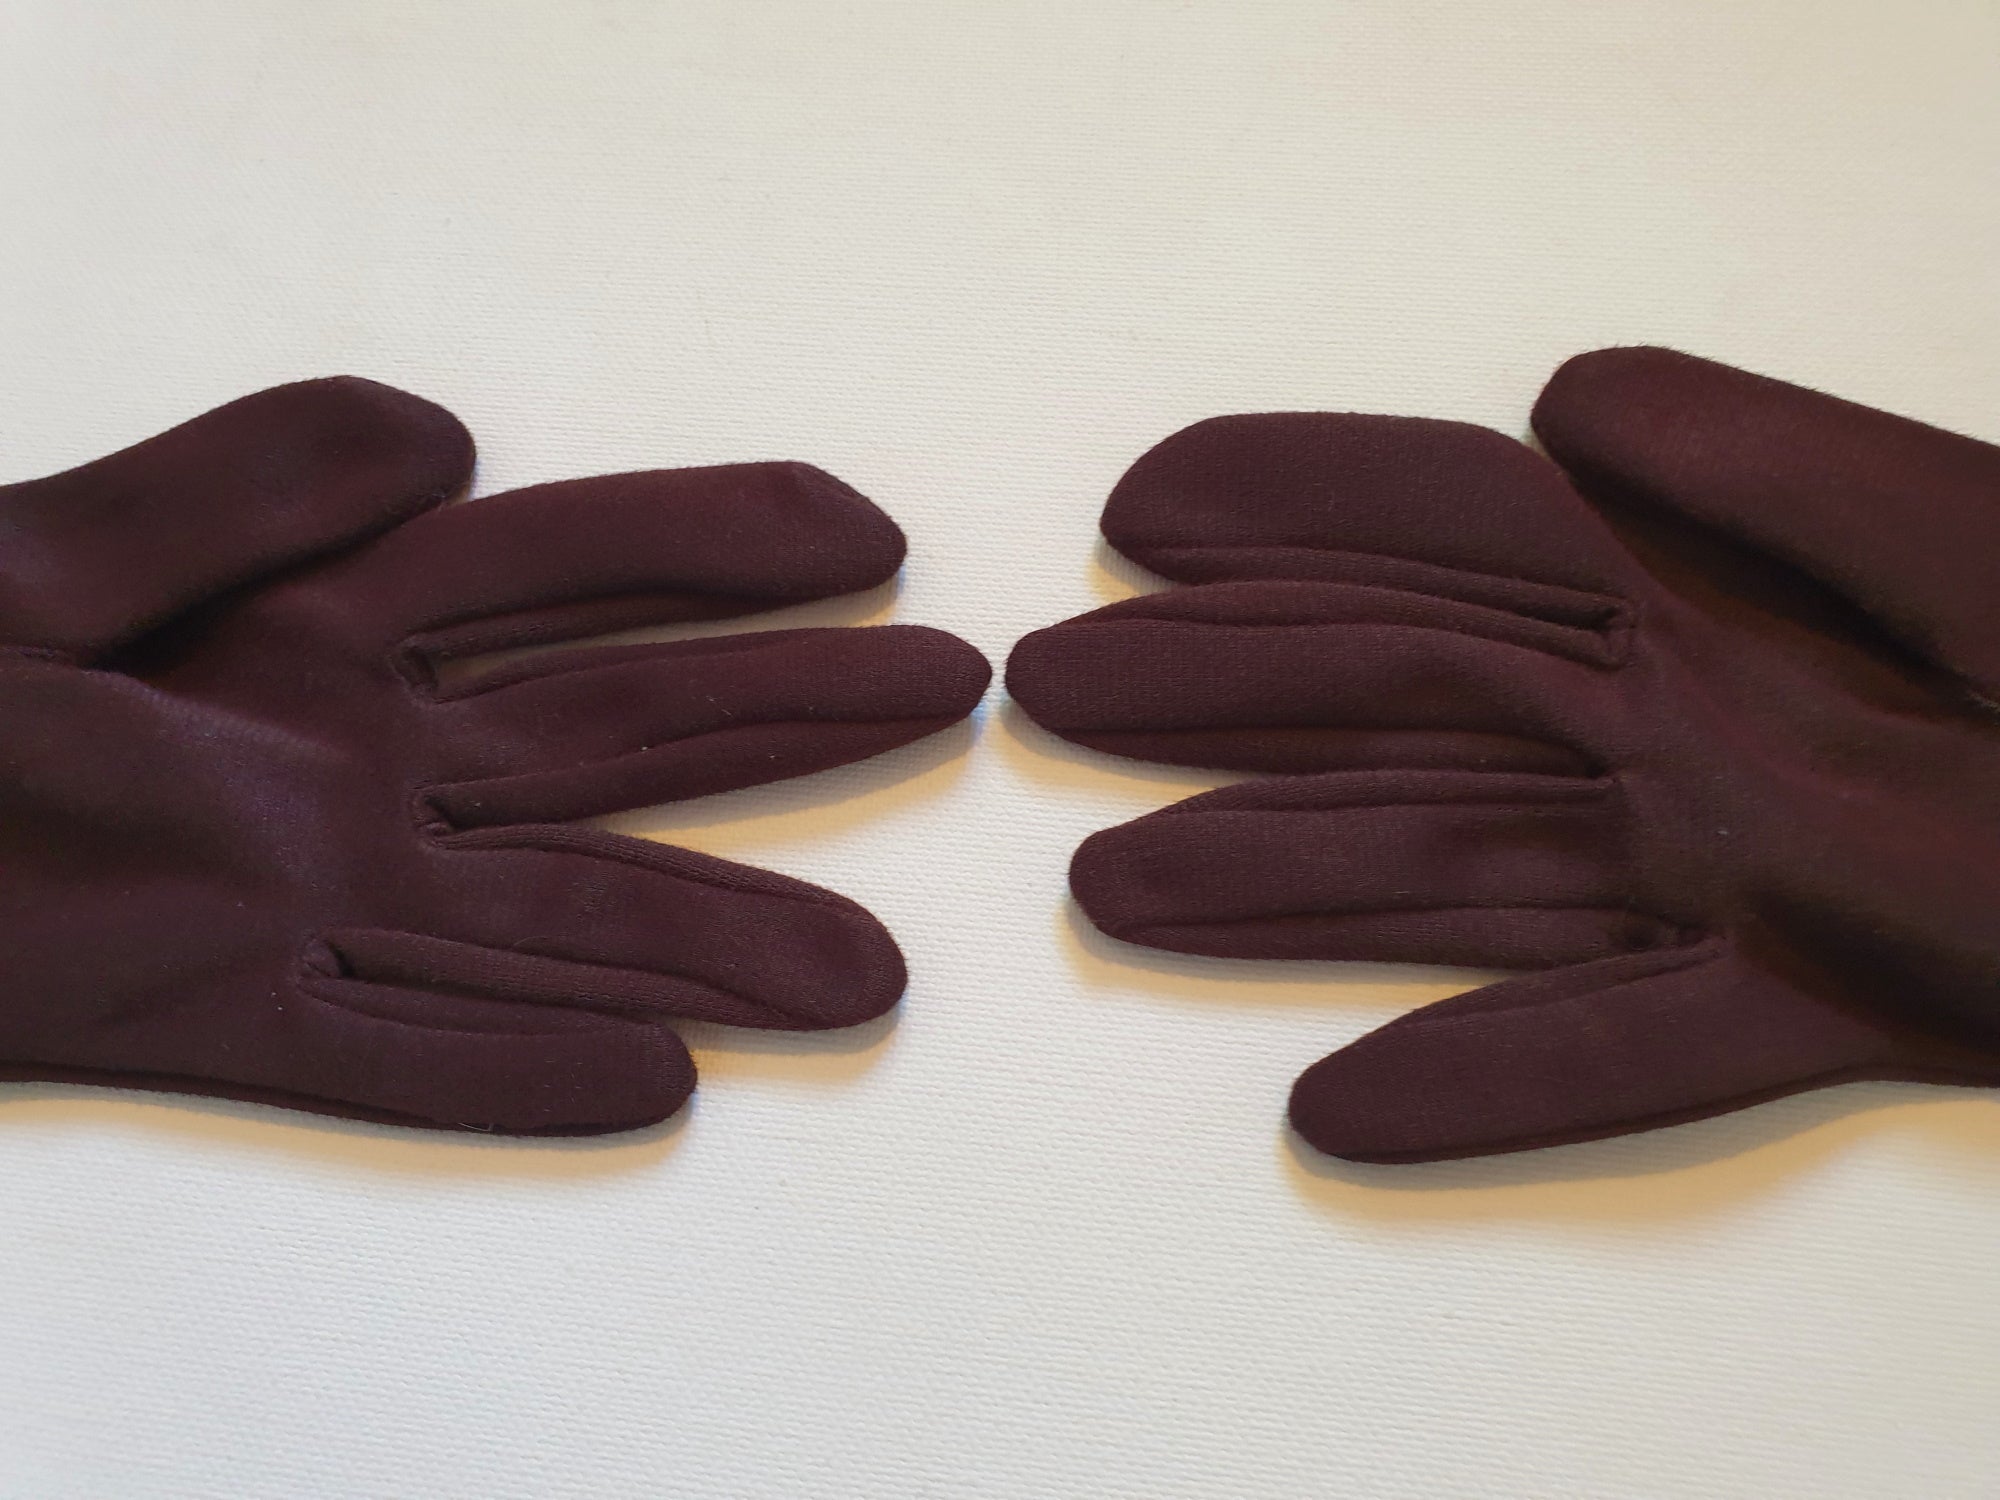 1960s vintage gathered chocolate brown nylon gloves size 6.5